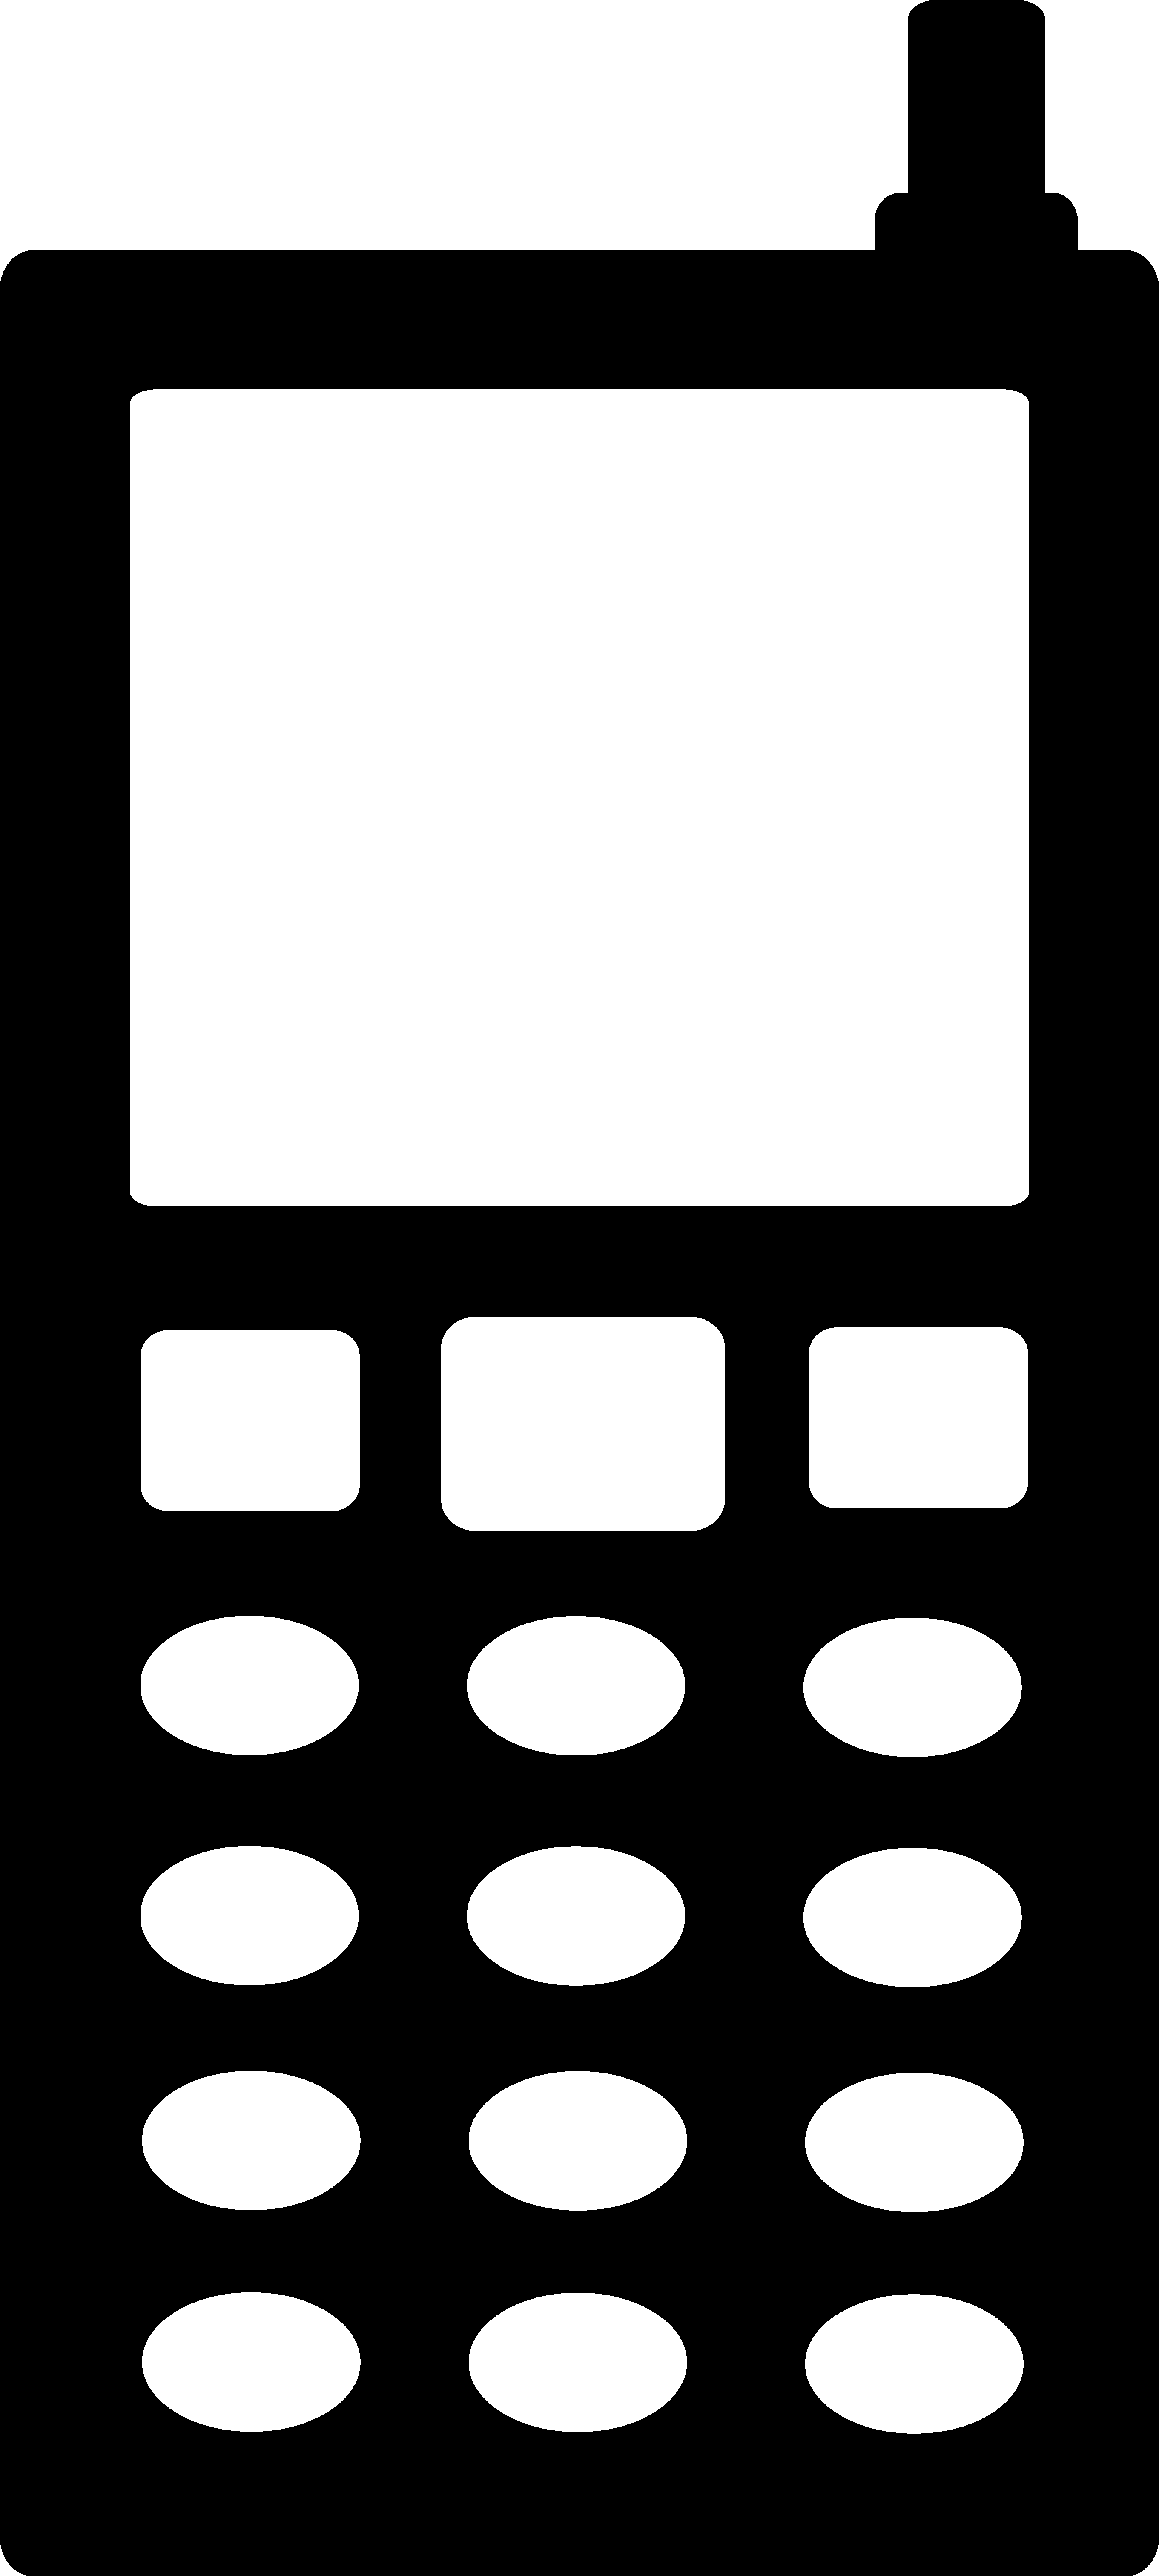 Cell phone logo clipart